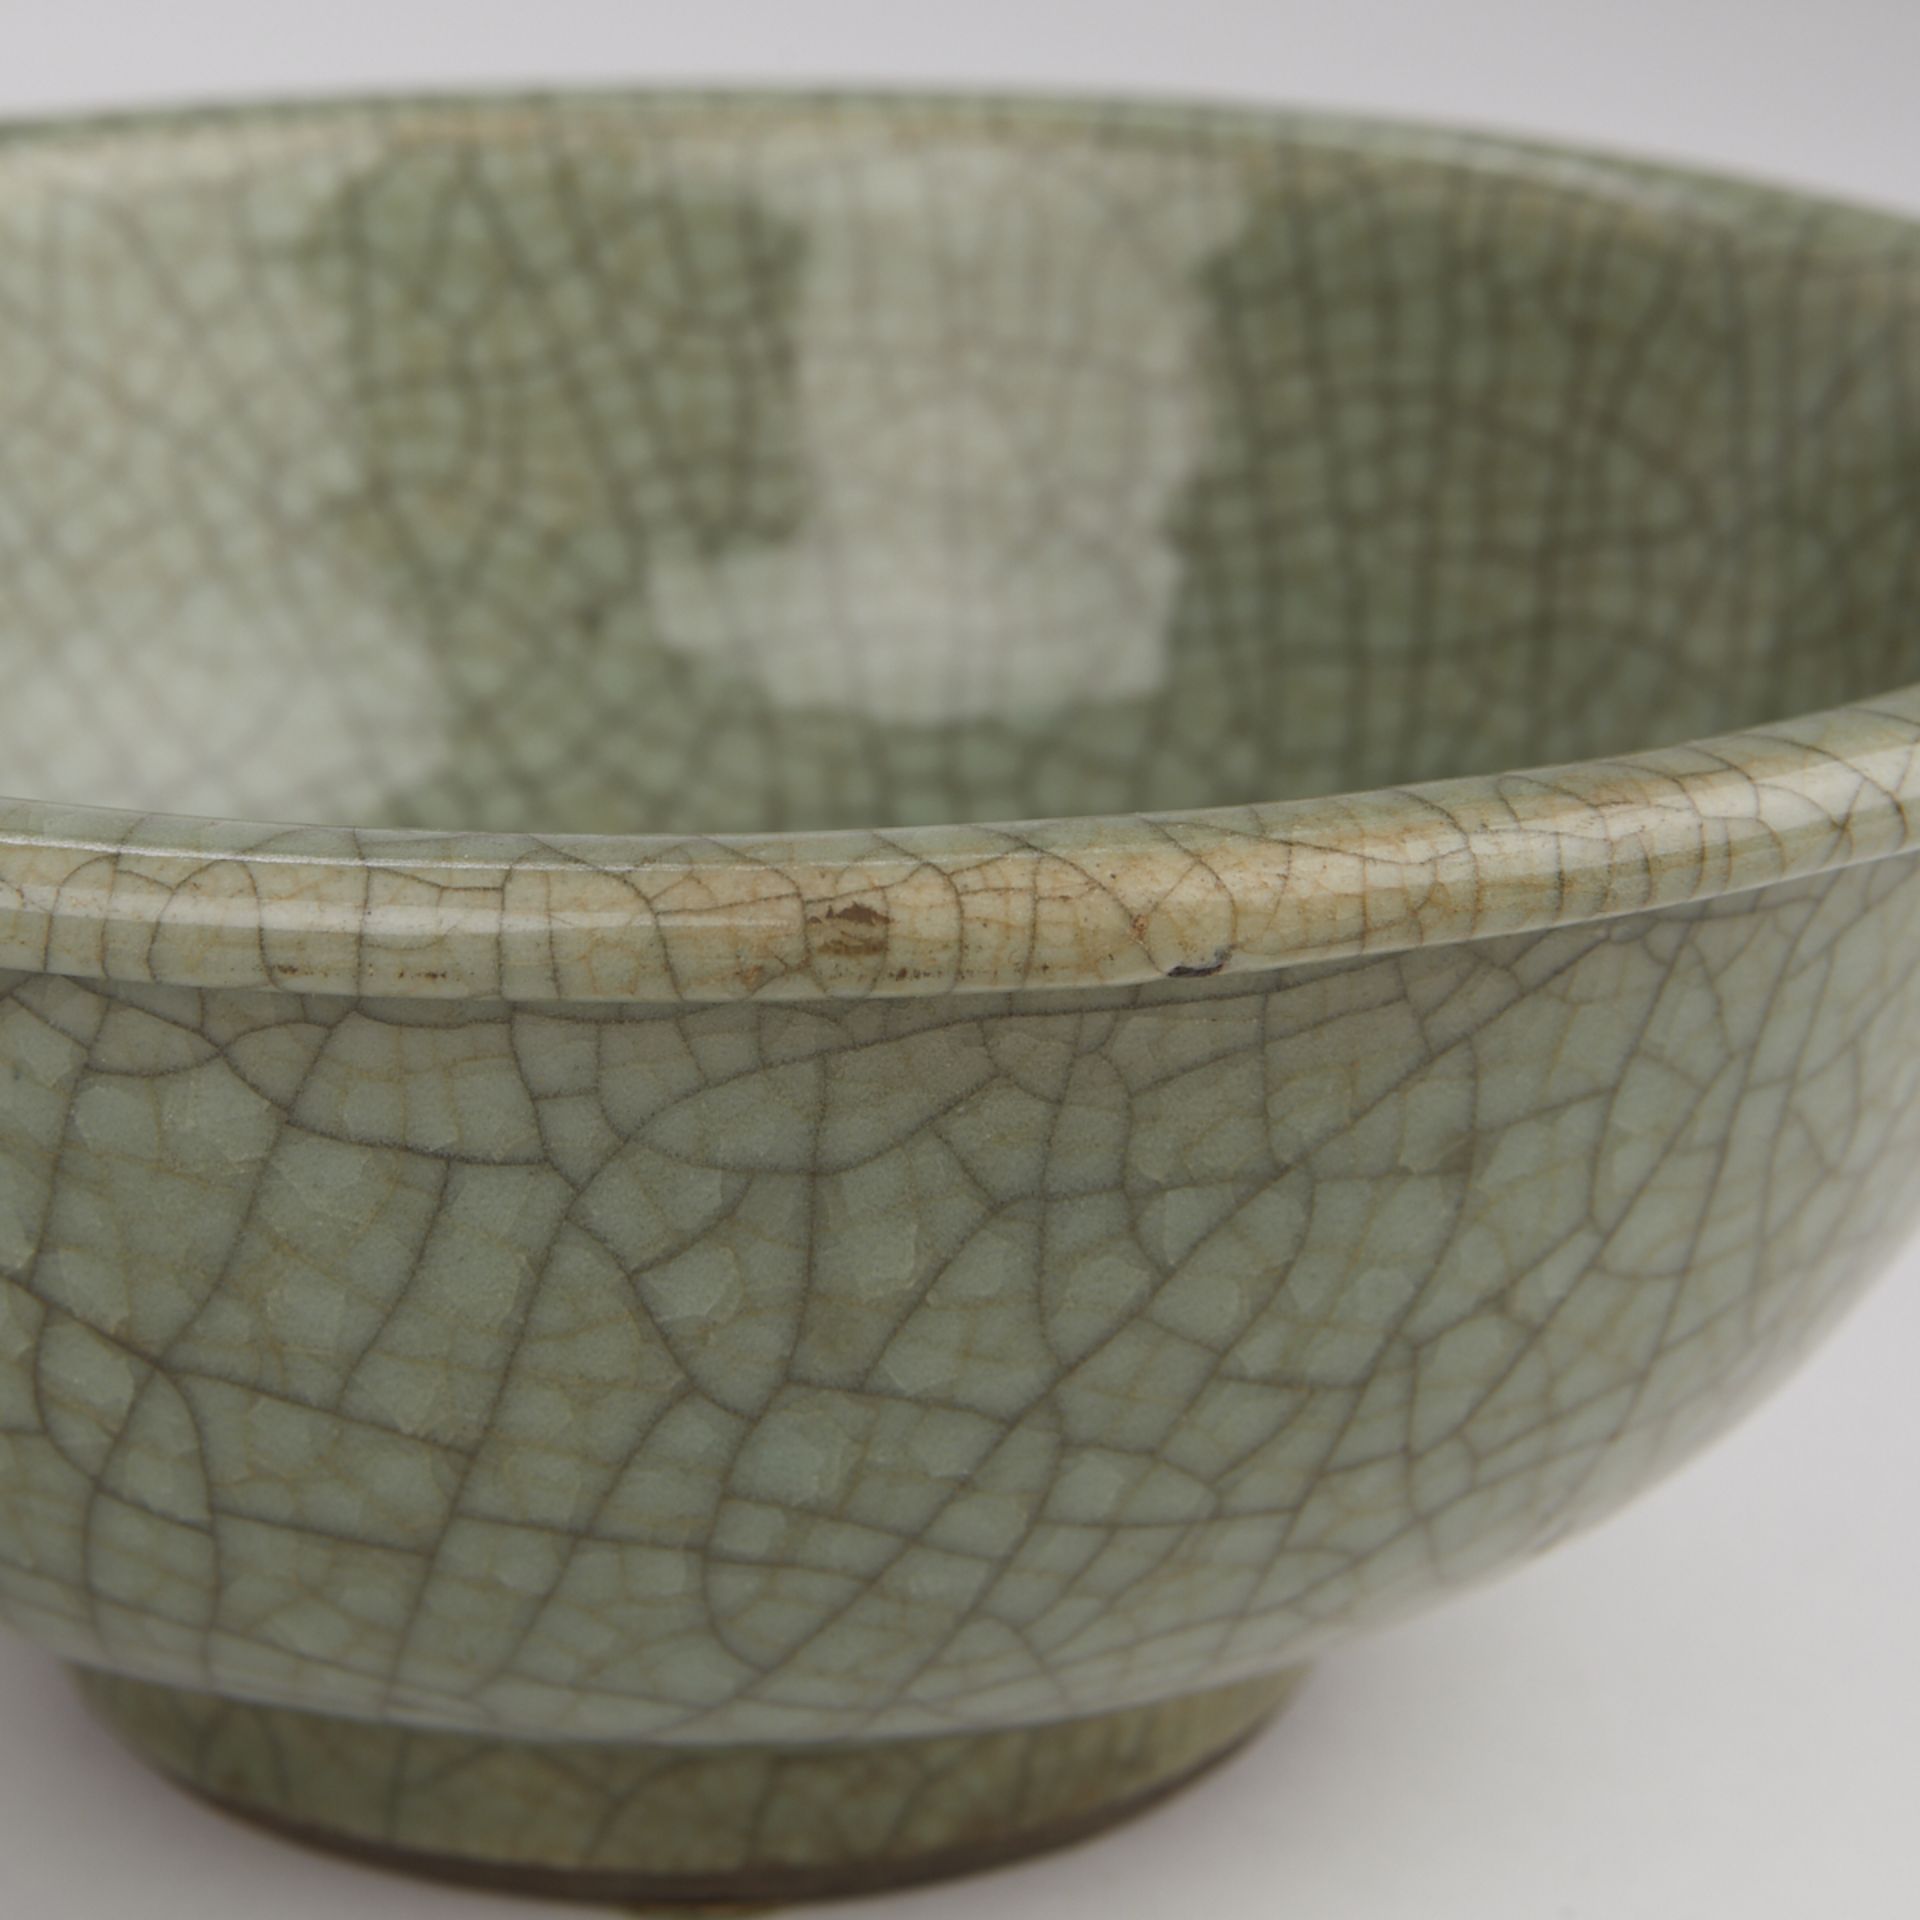 Chinese Crackled Celadon Bowl w/ Carved Wooden Stand - Image 8 of 8